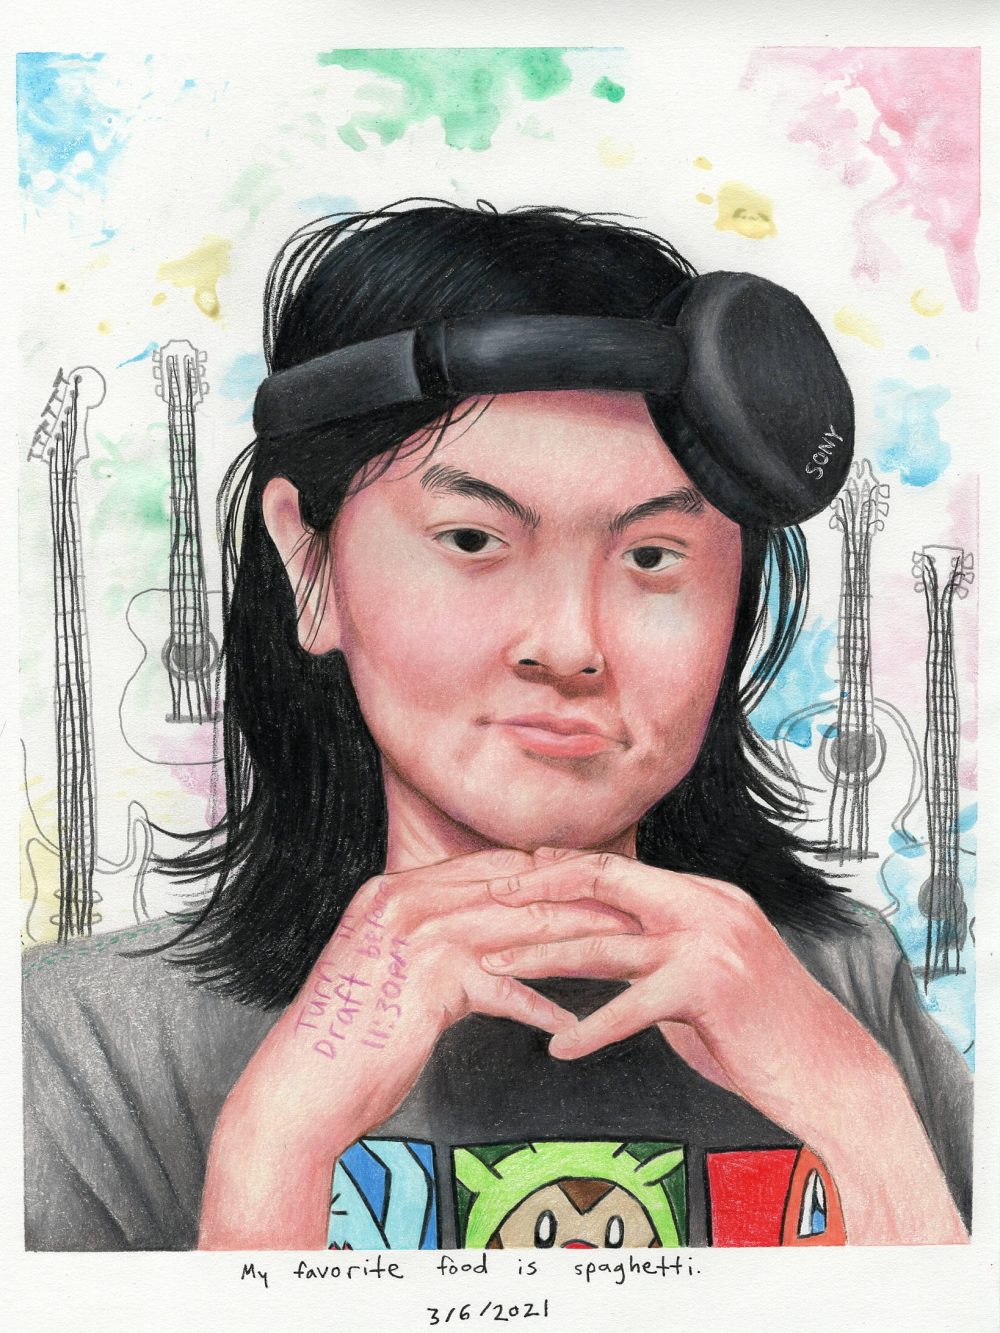 A self portrait drawn in colored pencil, of a girl wearing her headphones lopsided while also having her hands under her chin.